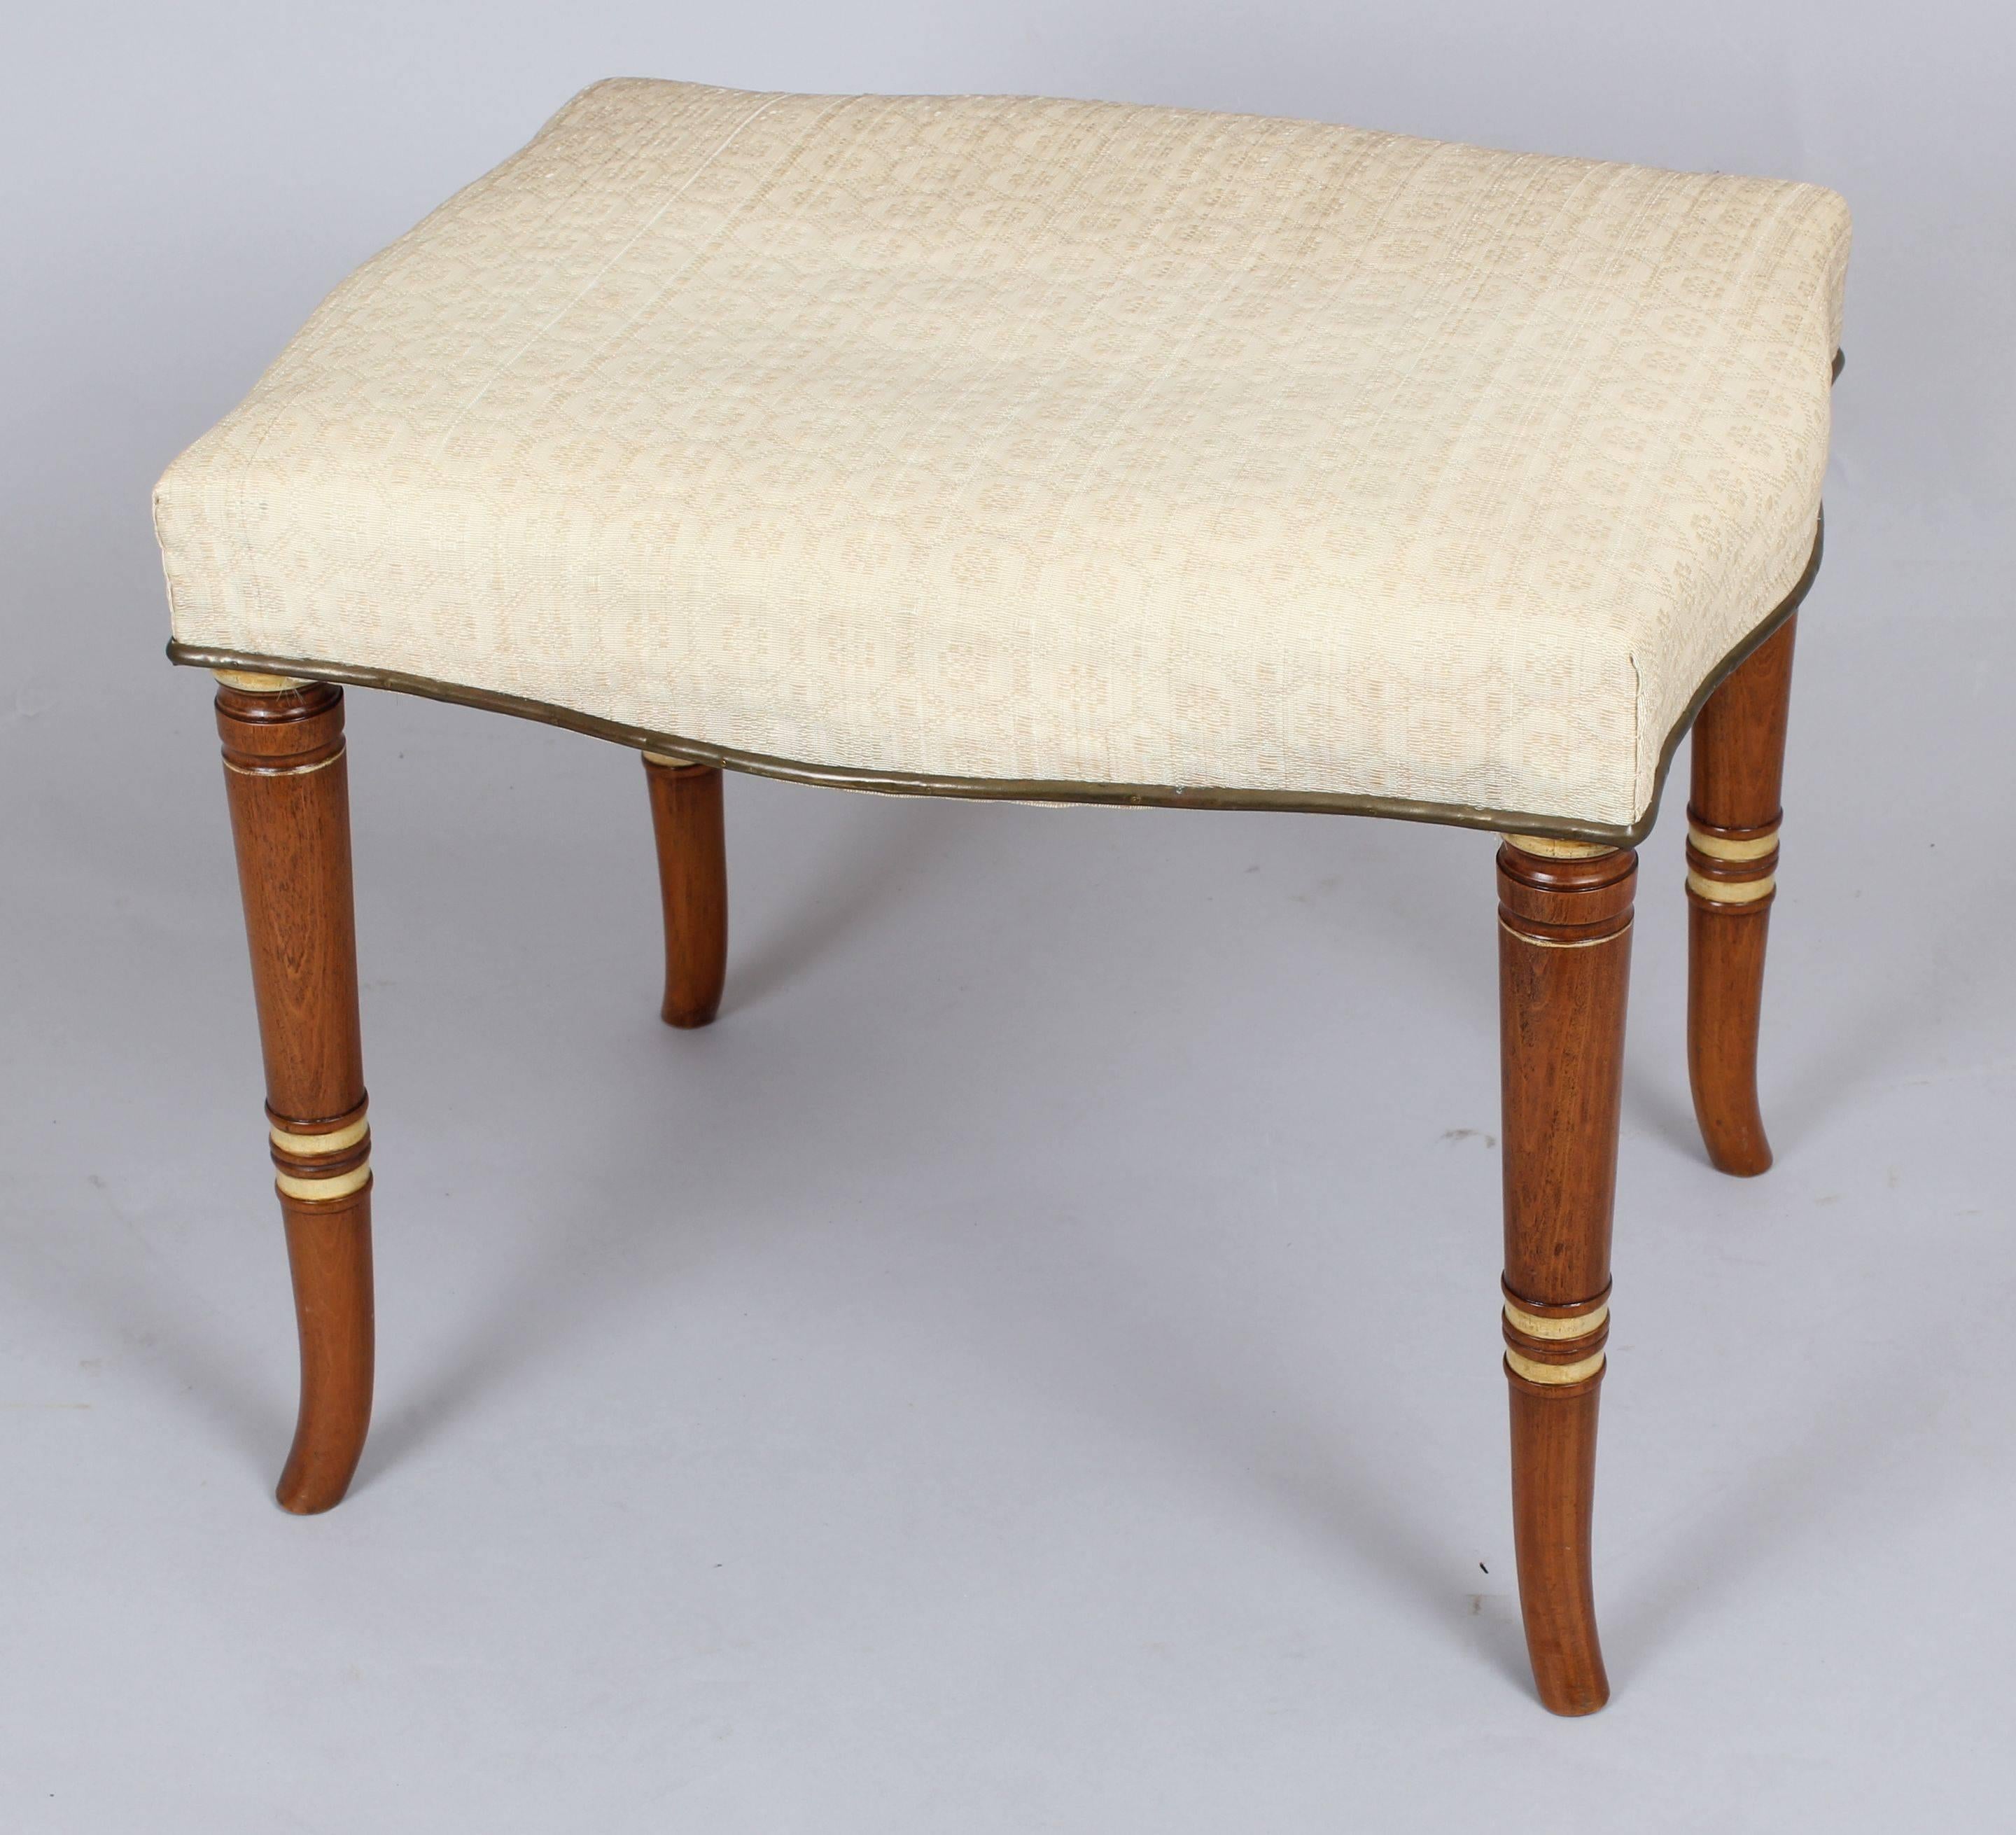 Pair of early 19th century Continental stools; the serpentine stuff-over seats covered (about twenty years ago) in cream woven horsehair with brass trim; on pale beech turned and tapering legs. The seat-rails retain their original cross-struts and